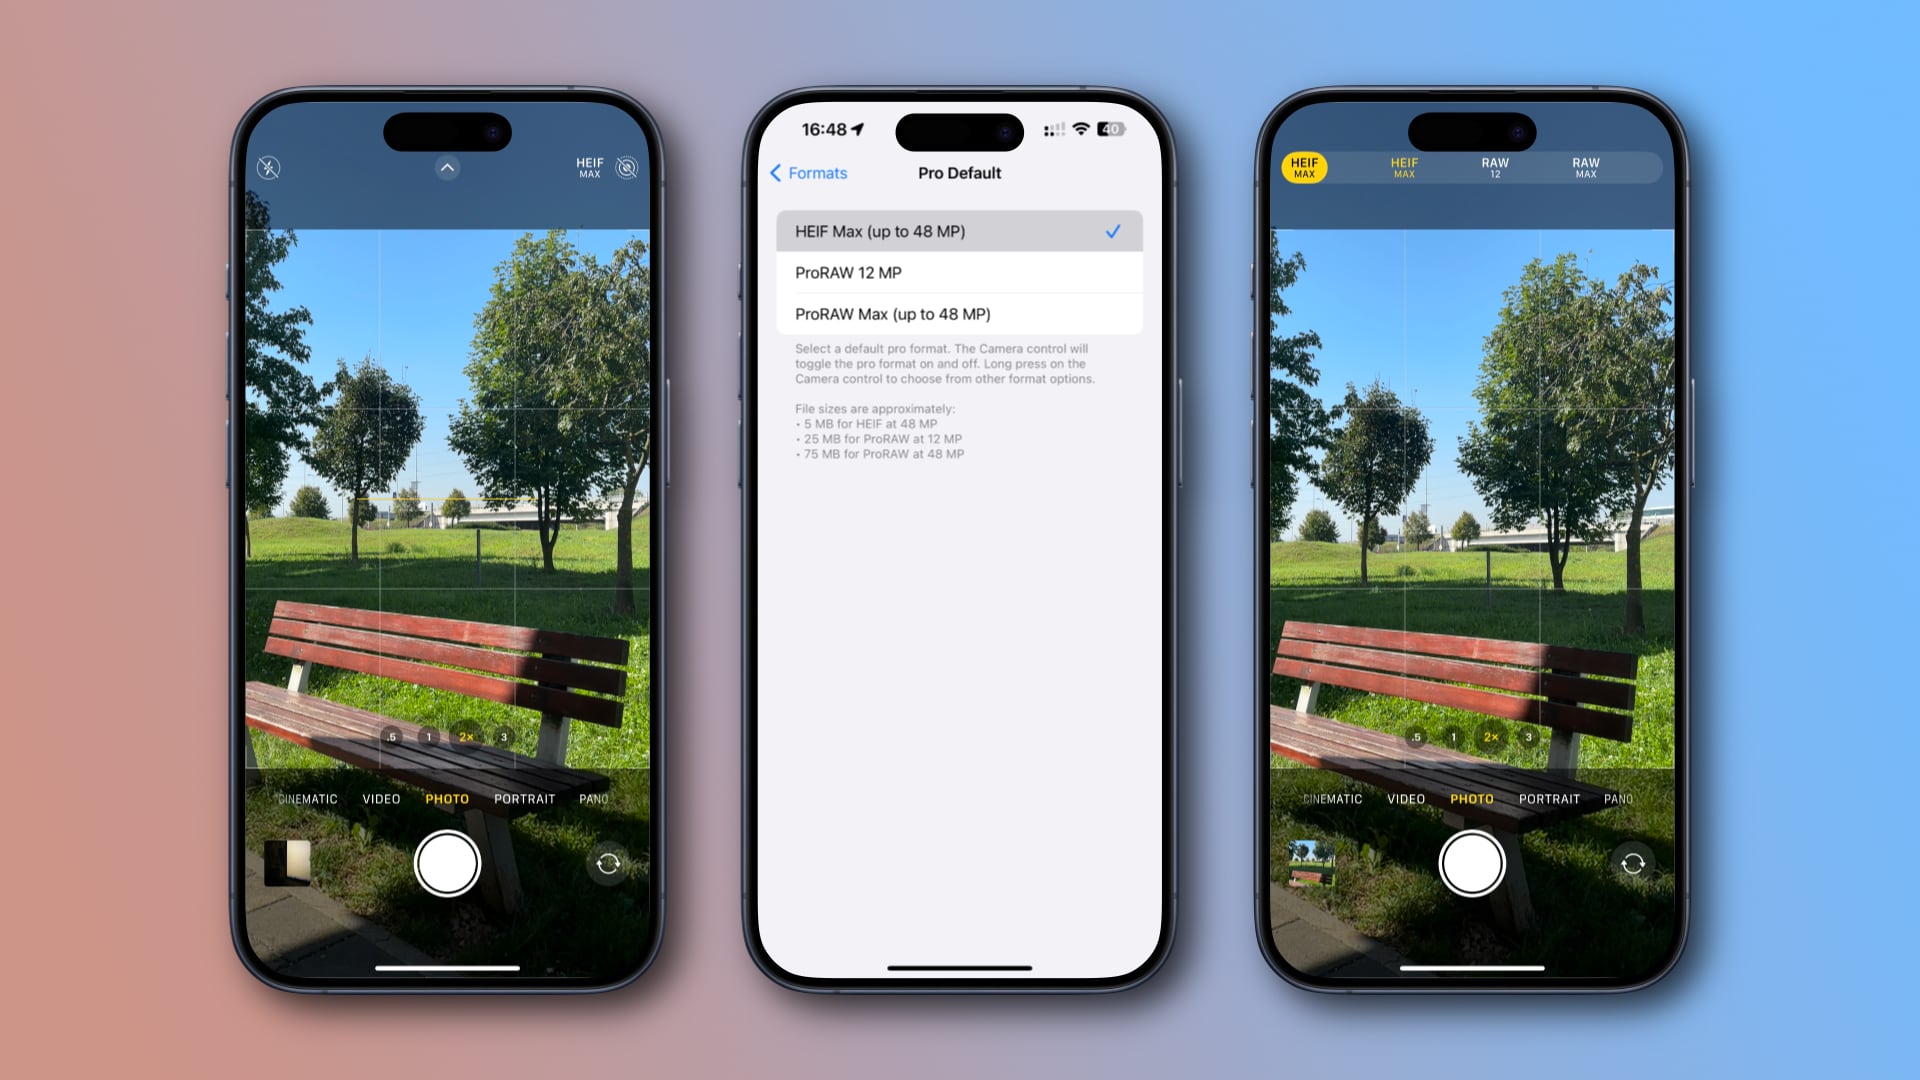 How to take 48MP HEIFF or JPEG photos on your iPhone